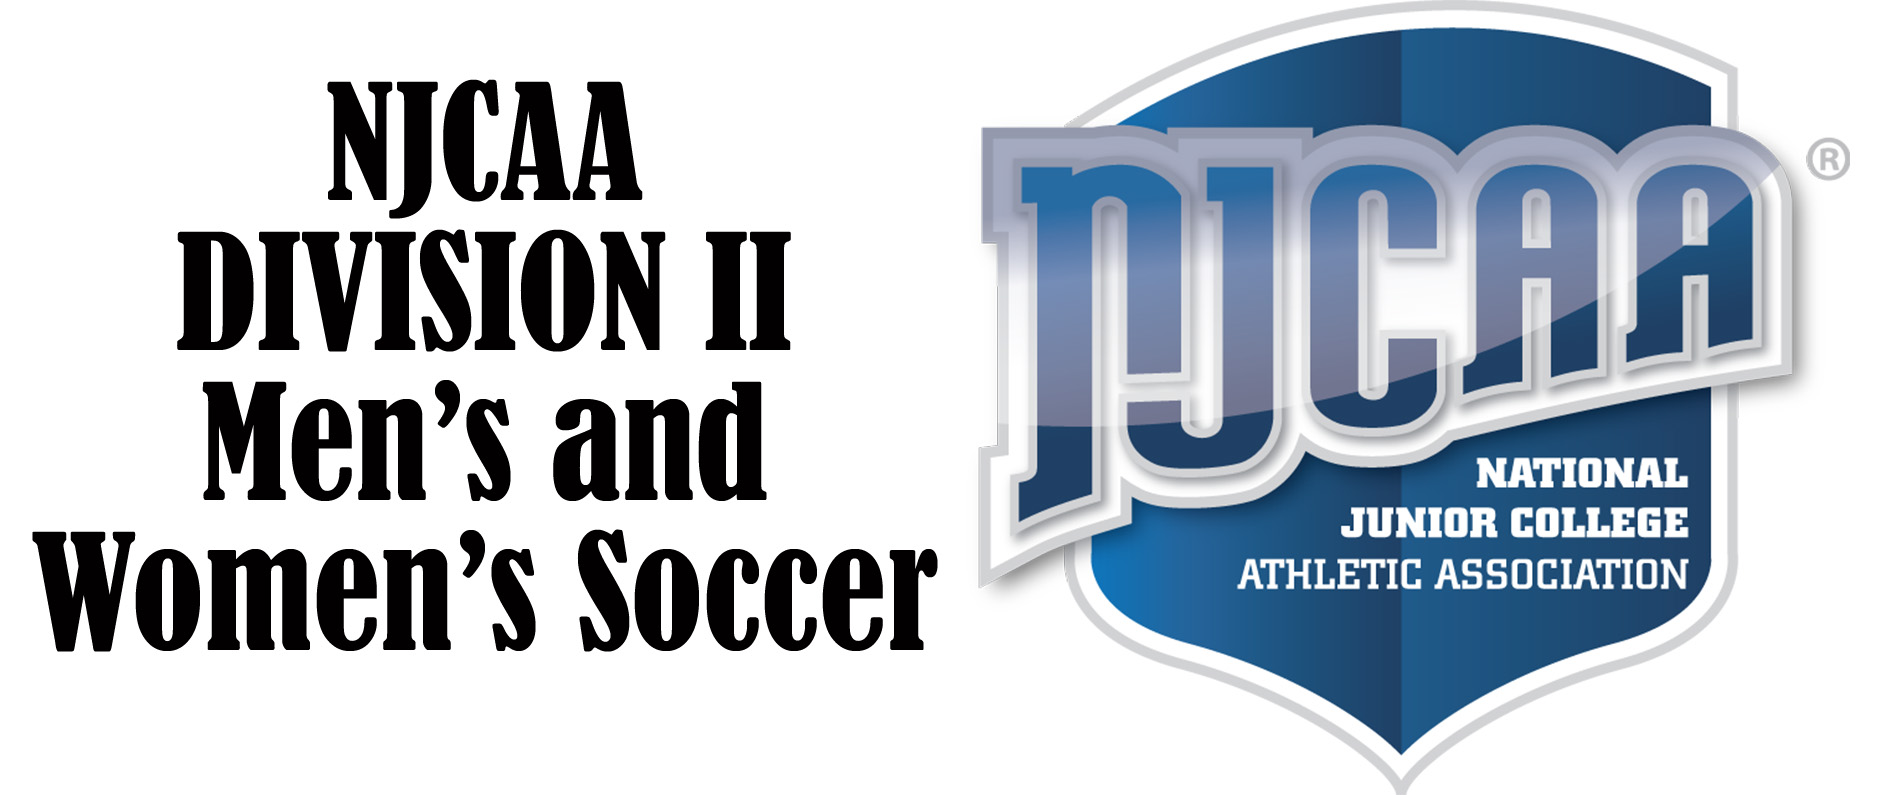 NJCAA releases information for Division II soccer play